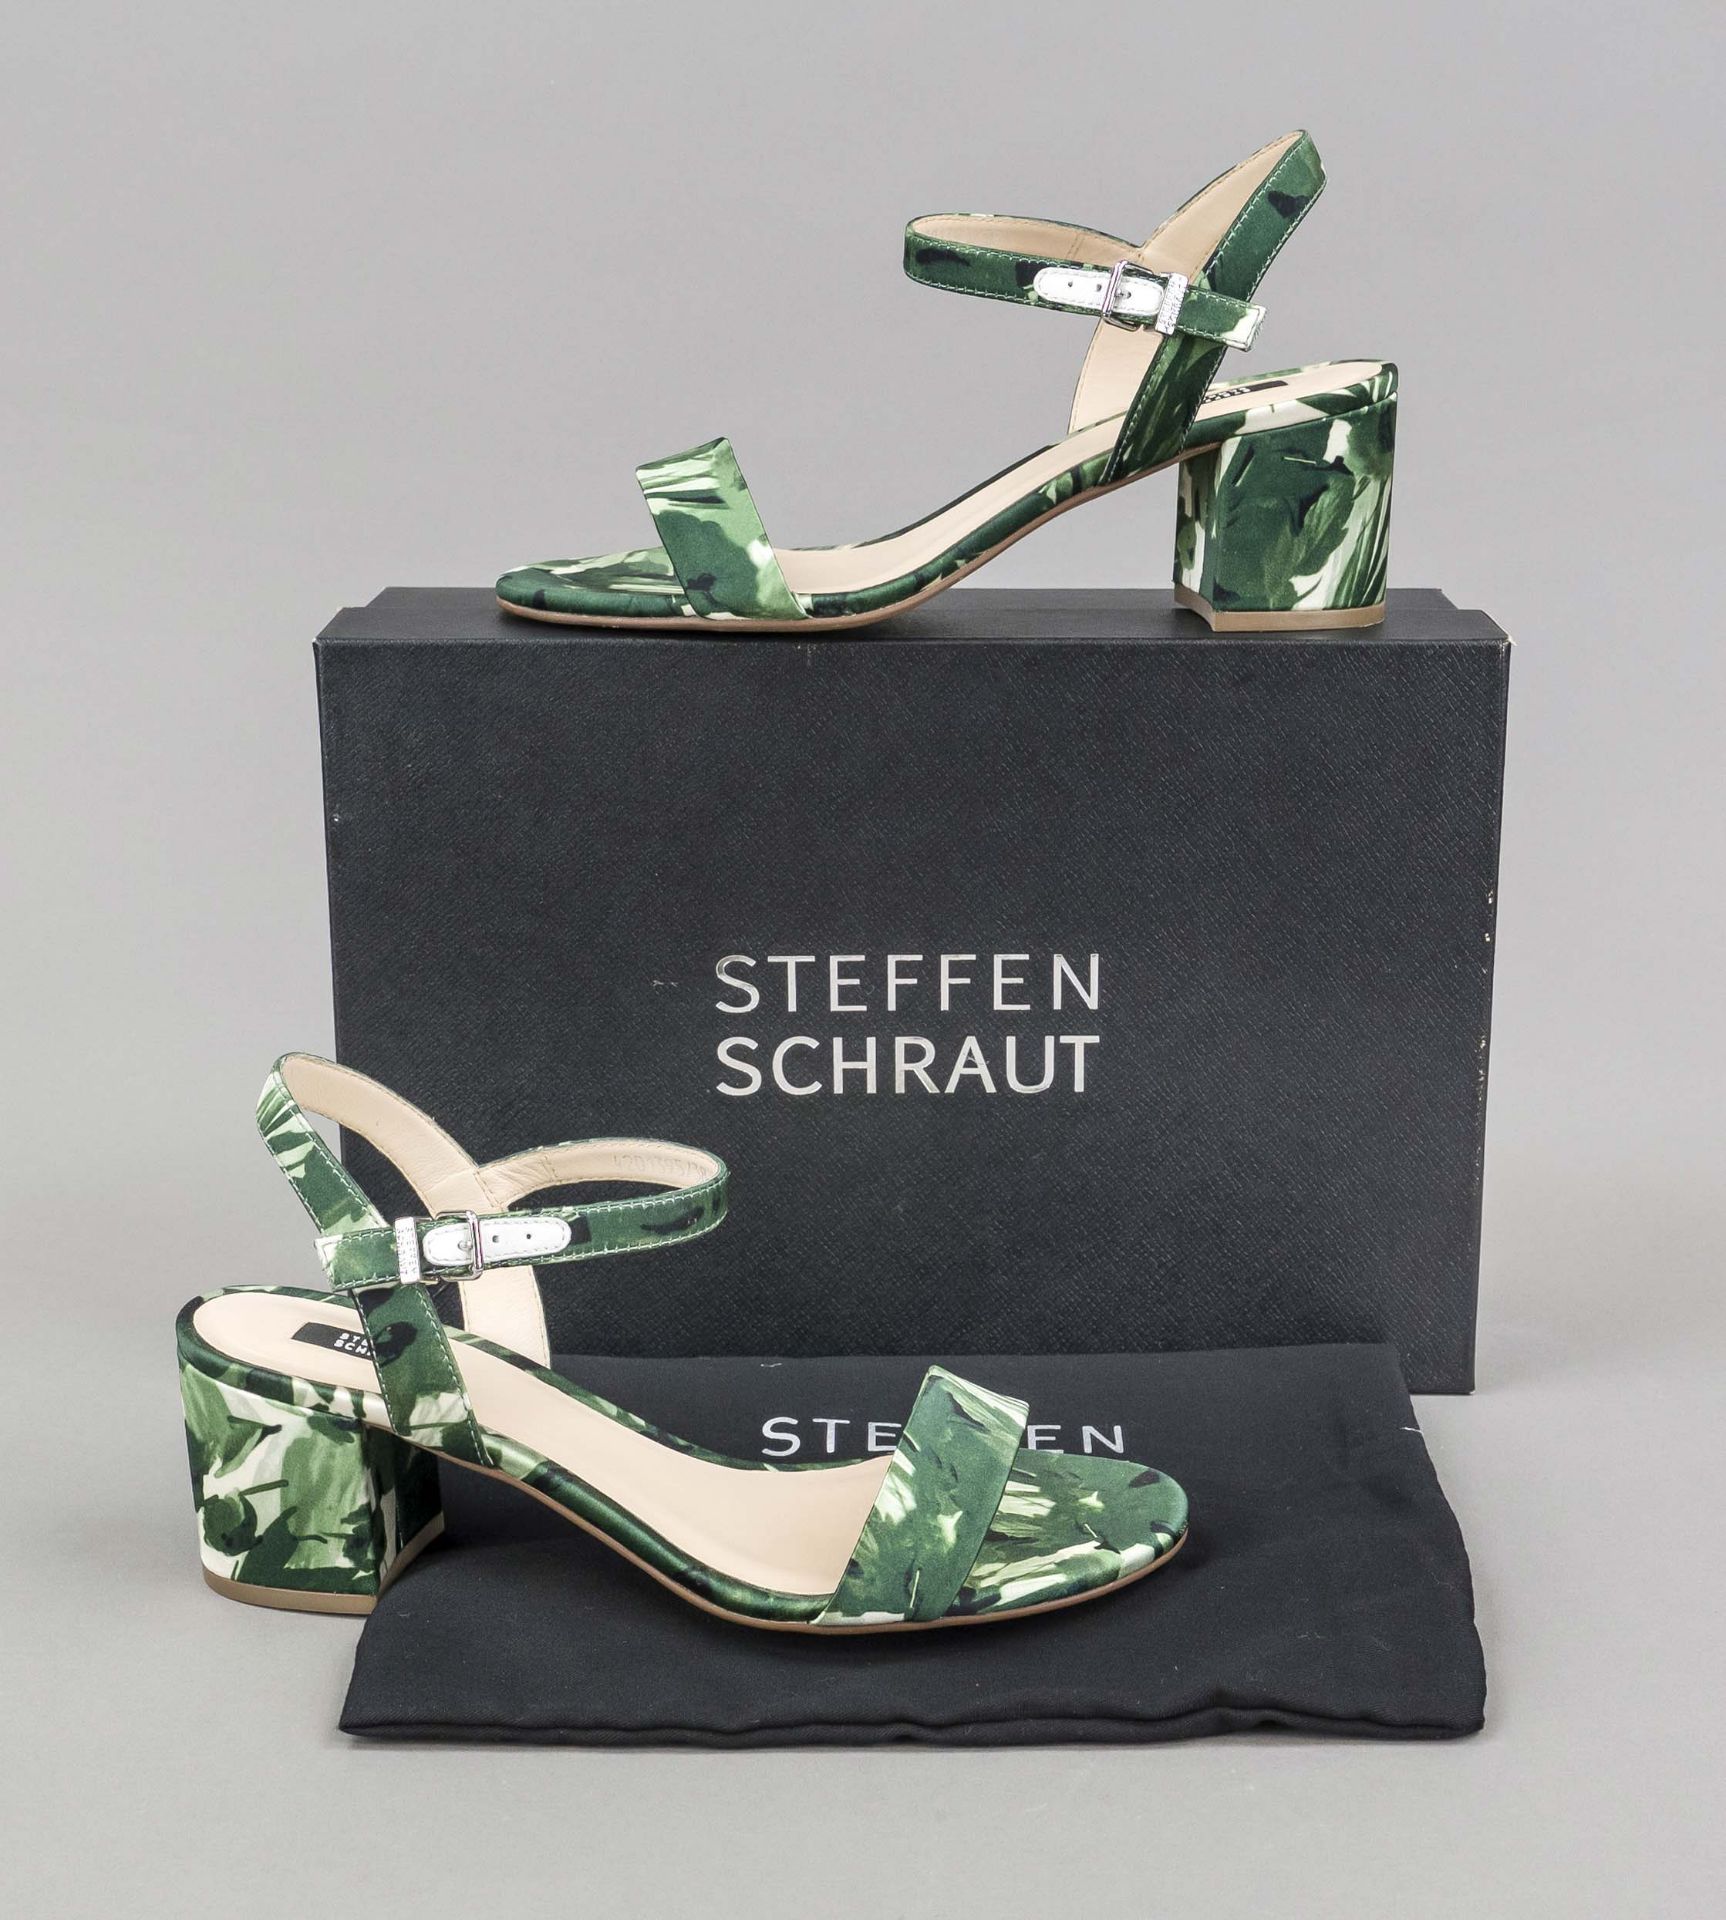 Steffen Schraut, summery sandals with block heel, slightly shiny fabric with leaf print in various